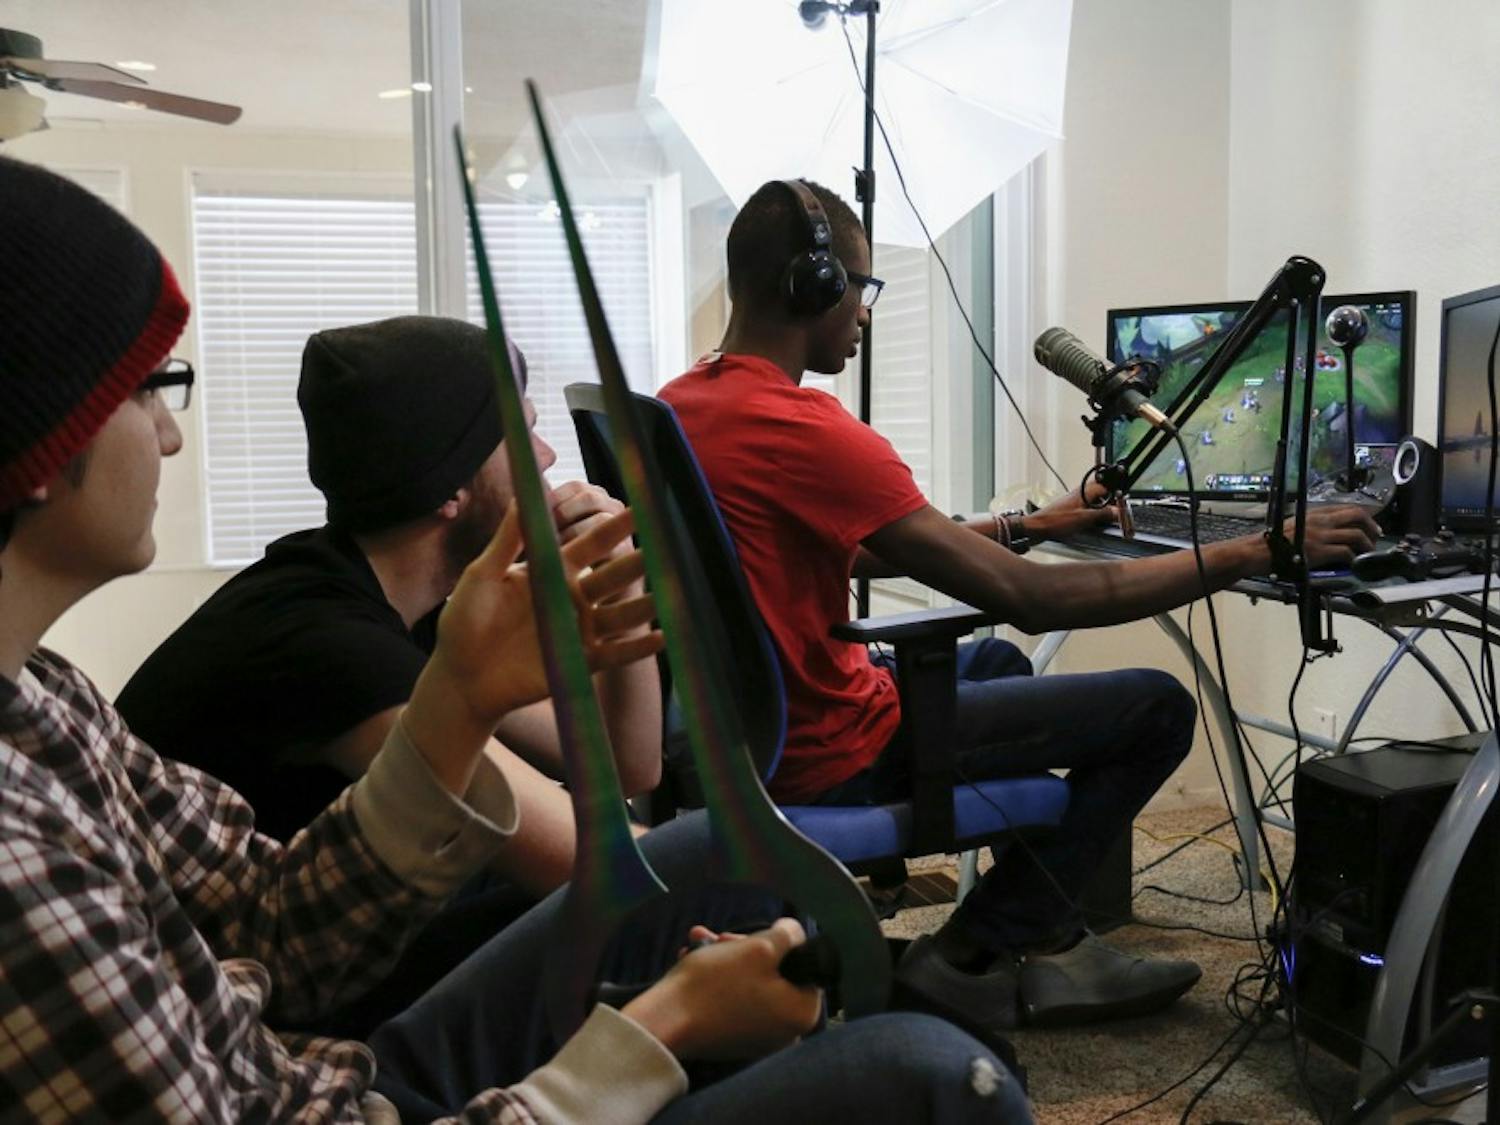 Billy Hargraves plays League of Legends while Zach Cordova and Jason Denbigeh watch him play on Sunday, Jan. 24, 2015. They each live stream different games for at least 21 hours a week.